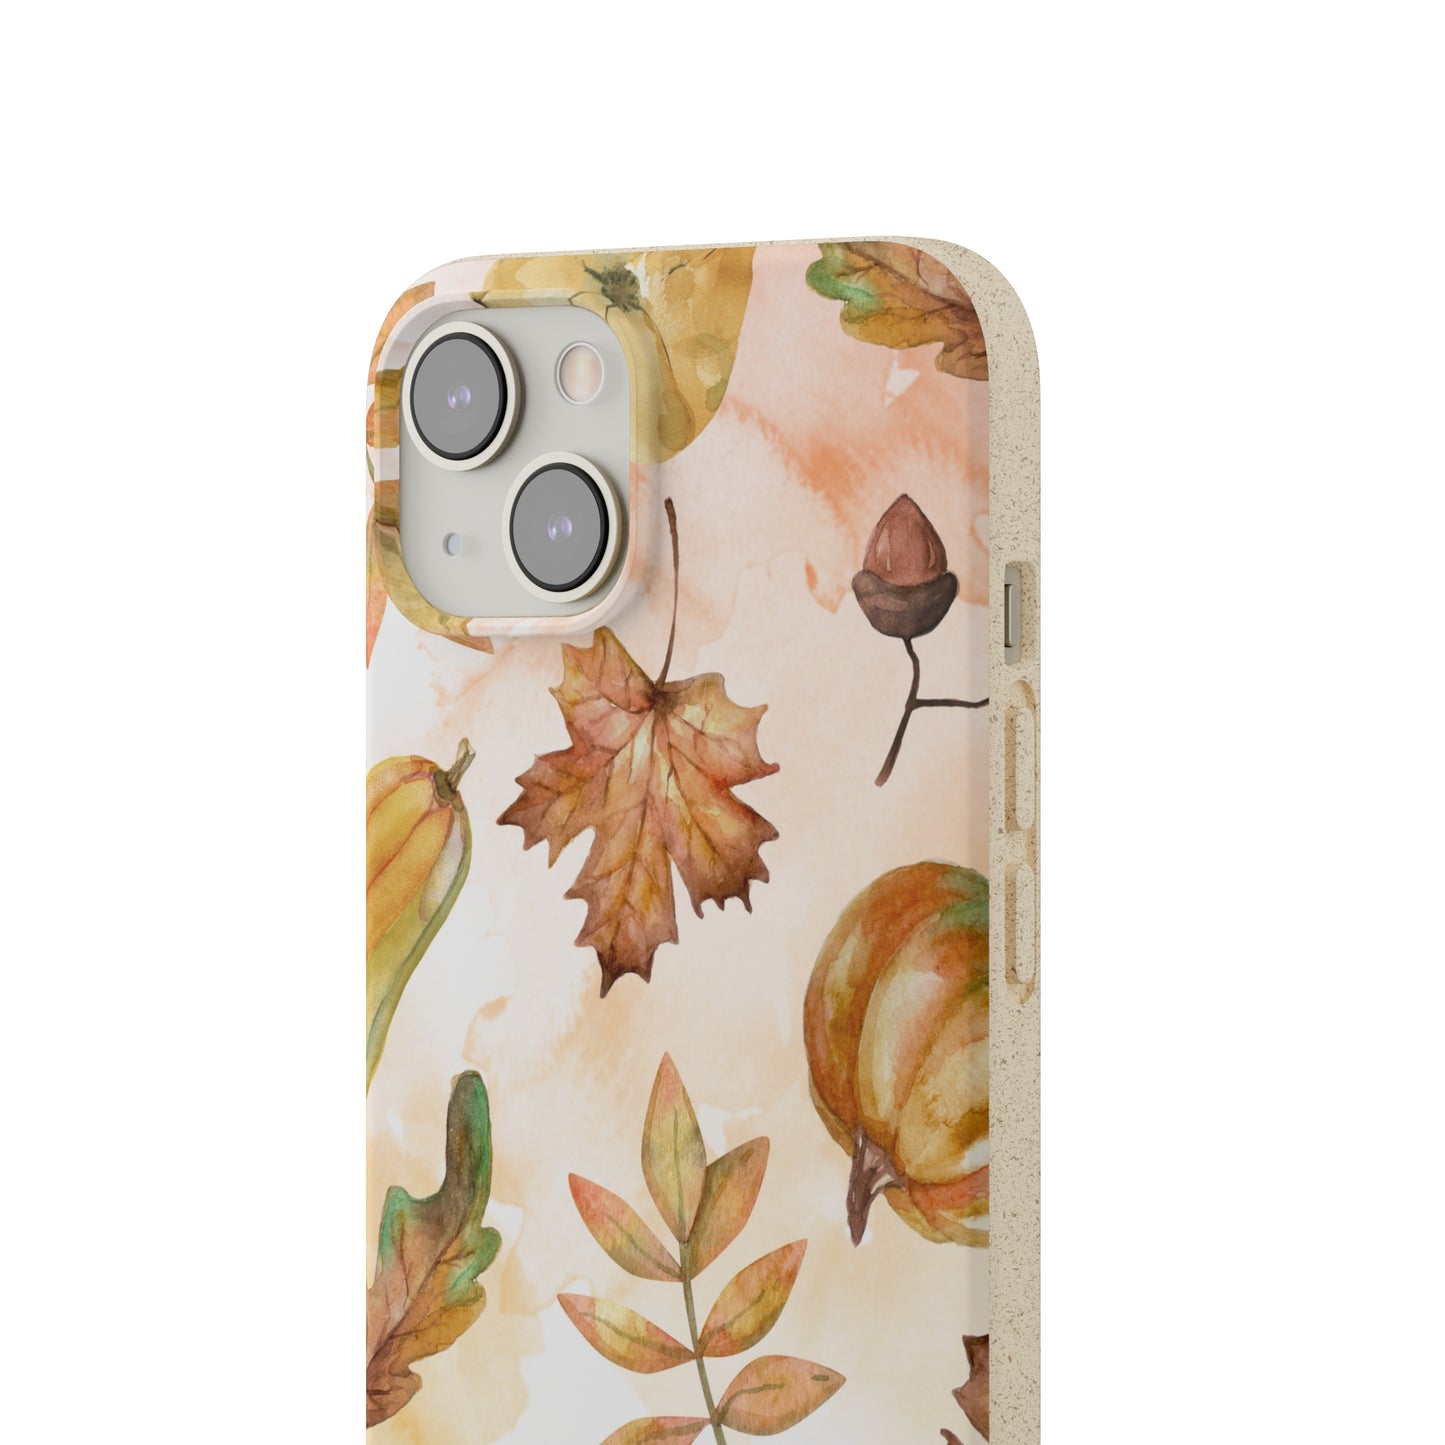 Autumn Harvest - Eco Case - Tallpine Cases | Sustainable and Eco-Friendly Phone Cases - autumn leaves nature New orange